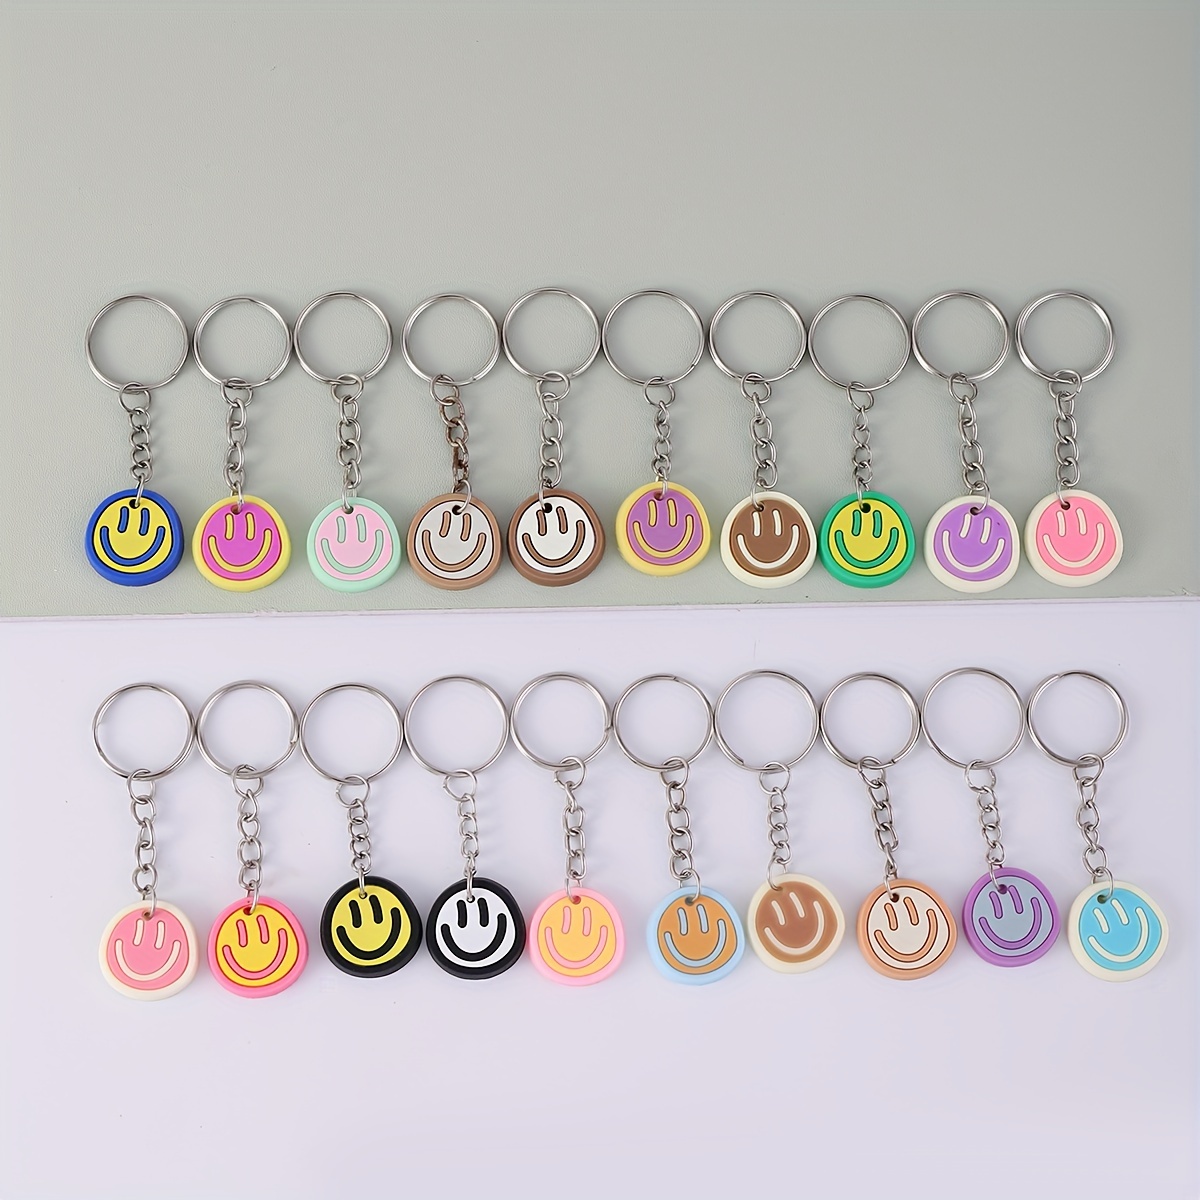 

20pcs Cartoon Smile Face Keychain Cute Key Chain Ring Purse Bag Backpack Charm Earbud Case Cover Accessories Party Supplies Gift